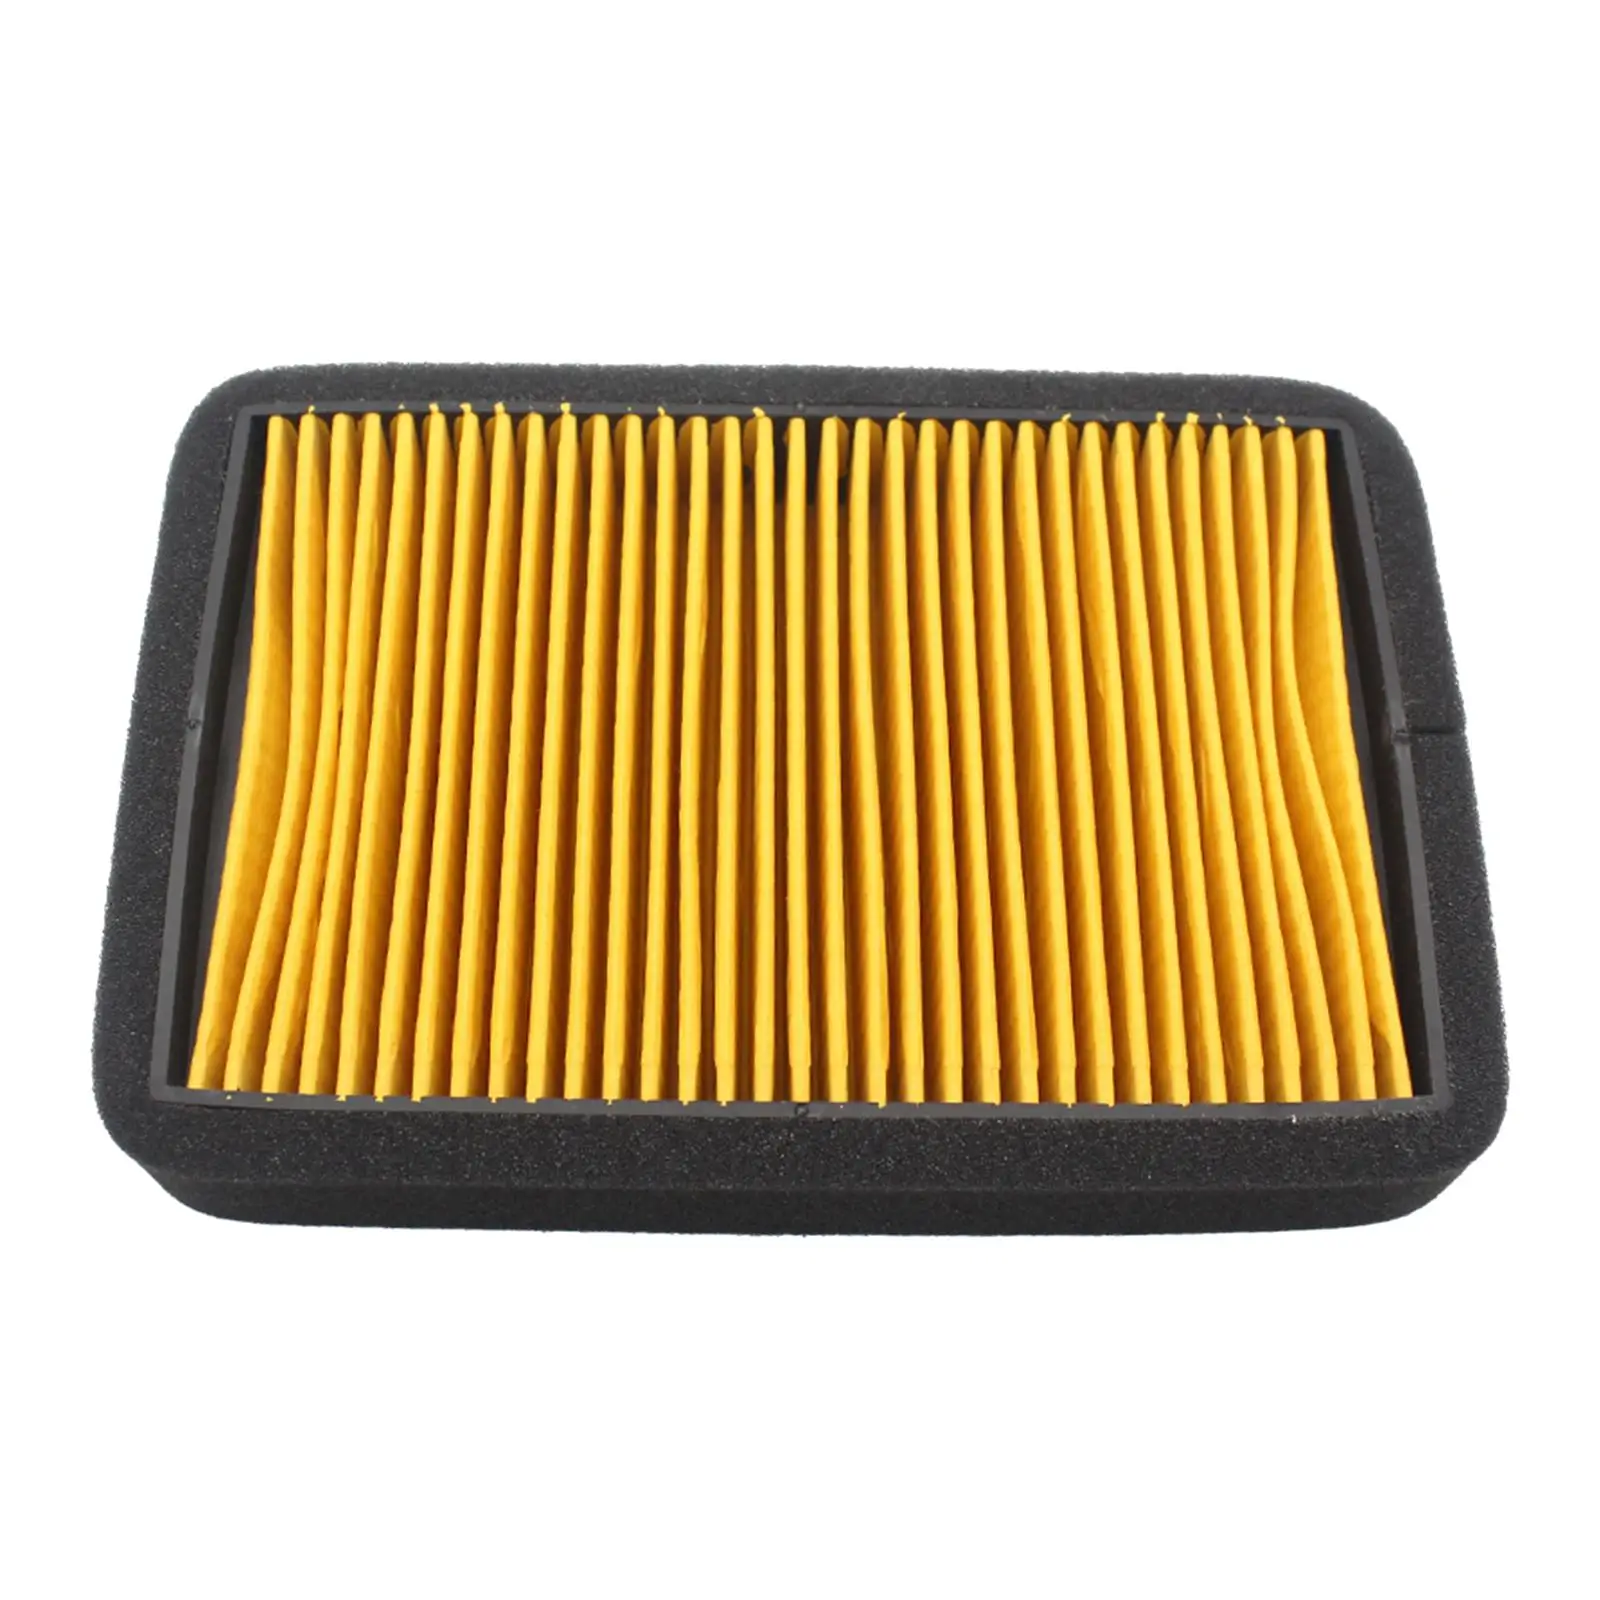 Air Filter Cleaner Bj150-29A-29B Replacement Fit for Benelli 150cc 500cc for Leoncino 500 502C Easy to Install Accessories